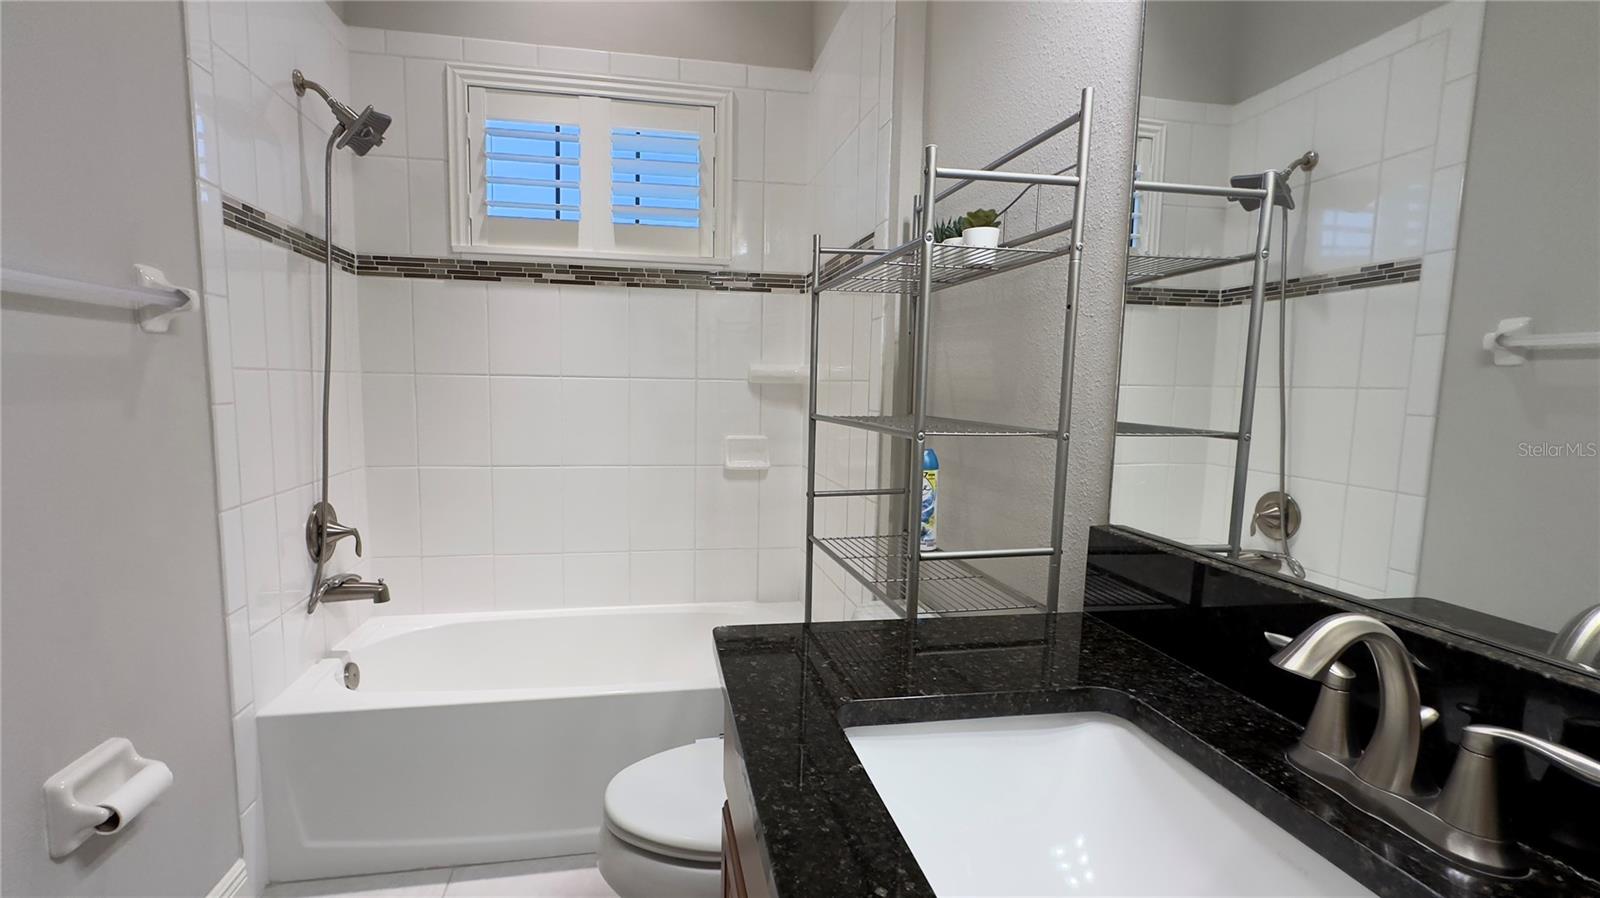 As with the rest of the bathrooms, granite counter tops and brushed nickel faucets give an elegant touchto this bathroom